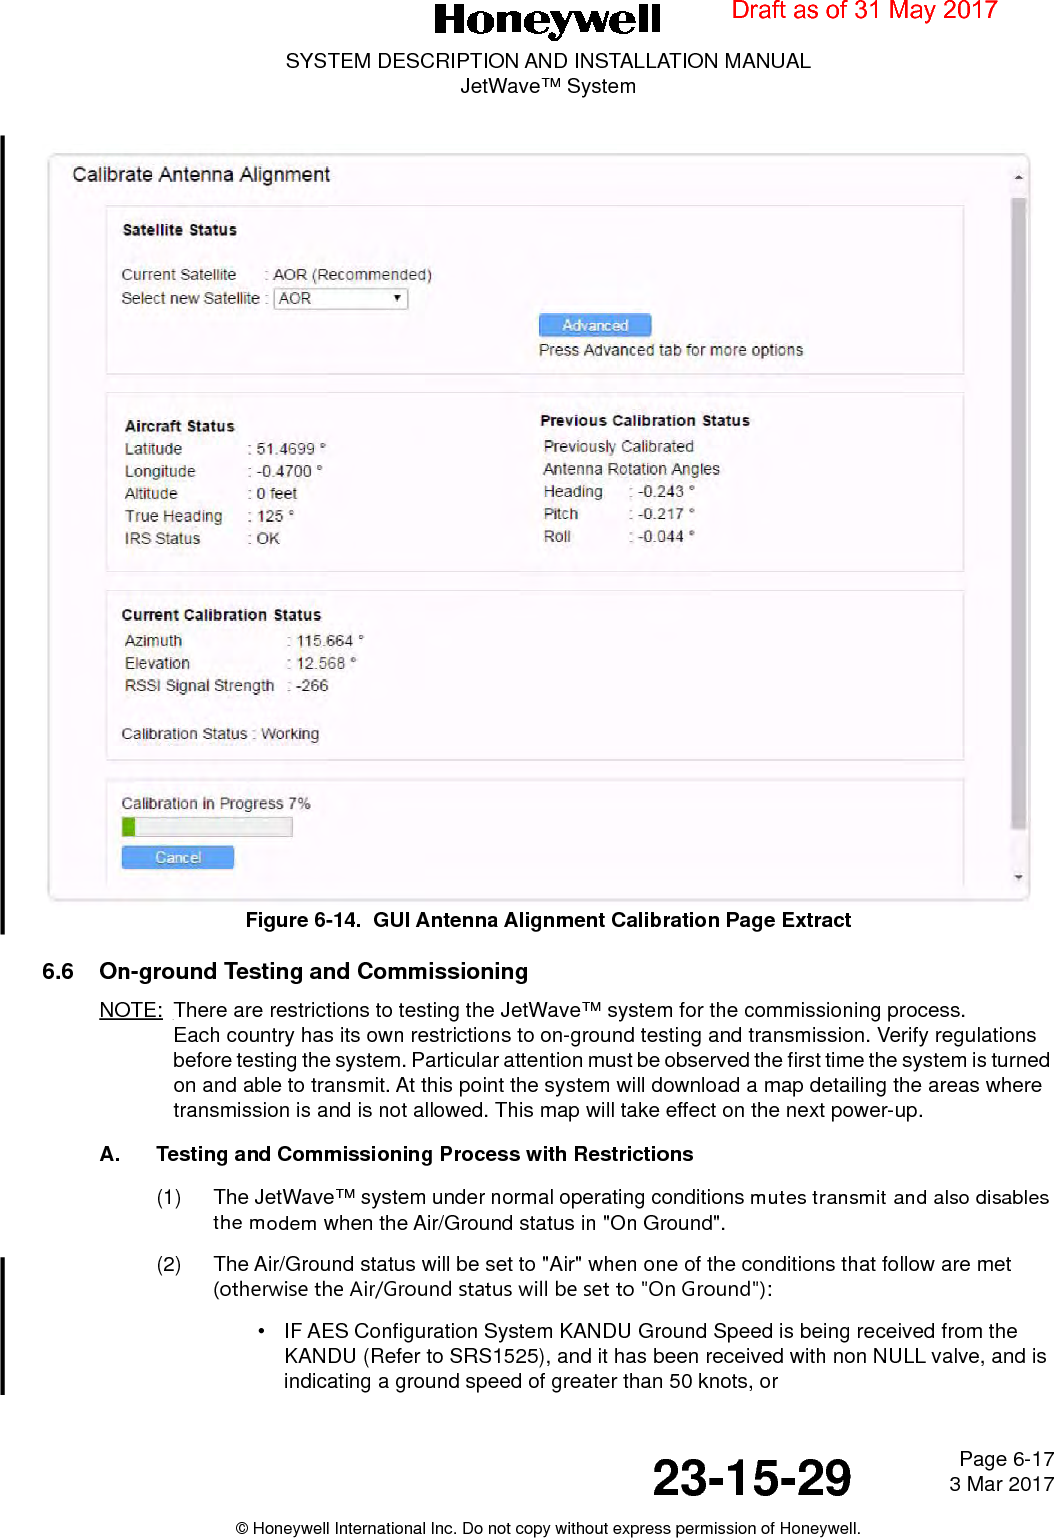 Page 6-17 3 Mar 201723-15-29SYSTEM DESCRIPTION AND INSTALLATION MANUALJetWave™ System© Honeywell International Inc. Do not copy without express permission of Honeywell.Figure 6-14.  GUI Antenna Alignment Calibration Page Extract6.6 On-ground Testing and CommissioningNOTE: There are restrictions to testing the JetWave™ system for the commissioning process.  Each country has its own restrictions to on-ground testing and transmission. Verify regulations before testing the system. Particular attention must be observed the first time the system is turned on and able to transmit. At this point the system will download a map detailing the areas where transmission is and is not allowed. This map will take effect on the next power-up.A. Testing and Commissioning Process with Restrictions(1) The JetWave™ system under normal operating conditions mutes transmit and also disables the modem when the Air/Ground status in &quot;On Ground&quot;.(2) The Air/Ground status will be set to &quot;Air&quot; when one of the conditions that follow are met (otherwise the Air/Ground status will be set to &quot;On Ground&quot;):• IF AES Configuration System KANDU Ground Speed is being received from the KANDU (Refer to SRS1525), and it has been received with non NULL valve, and is indicating a ground speed of greater than 50 knots, orDraft as of 31 May 2017